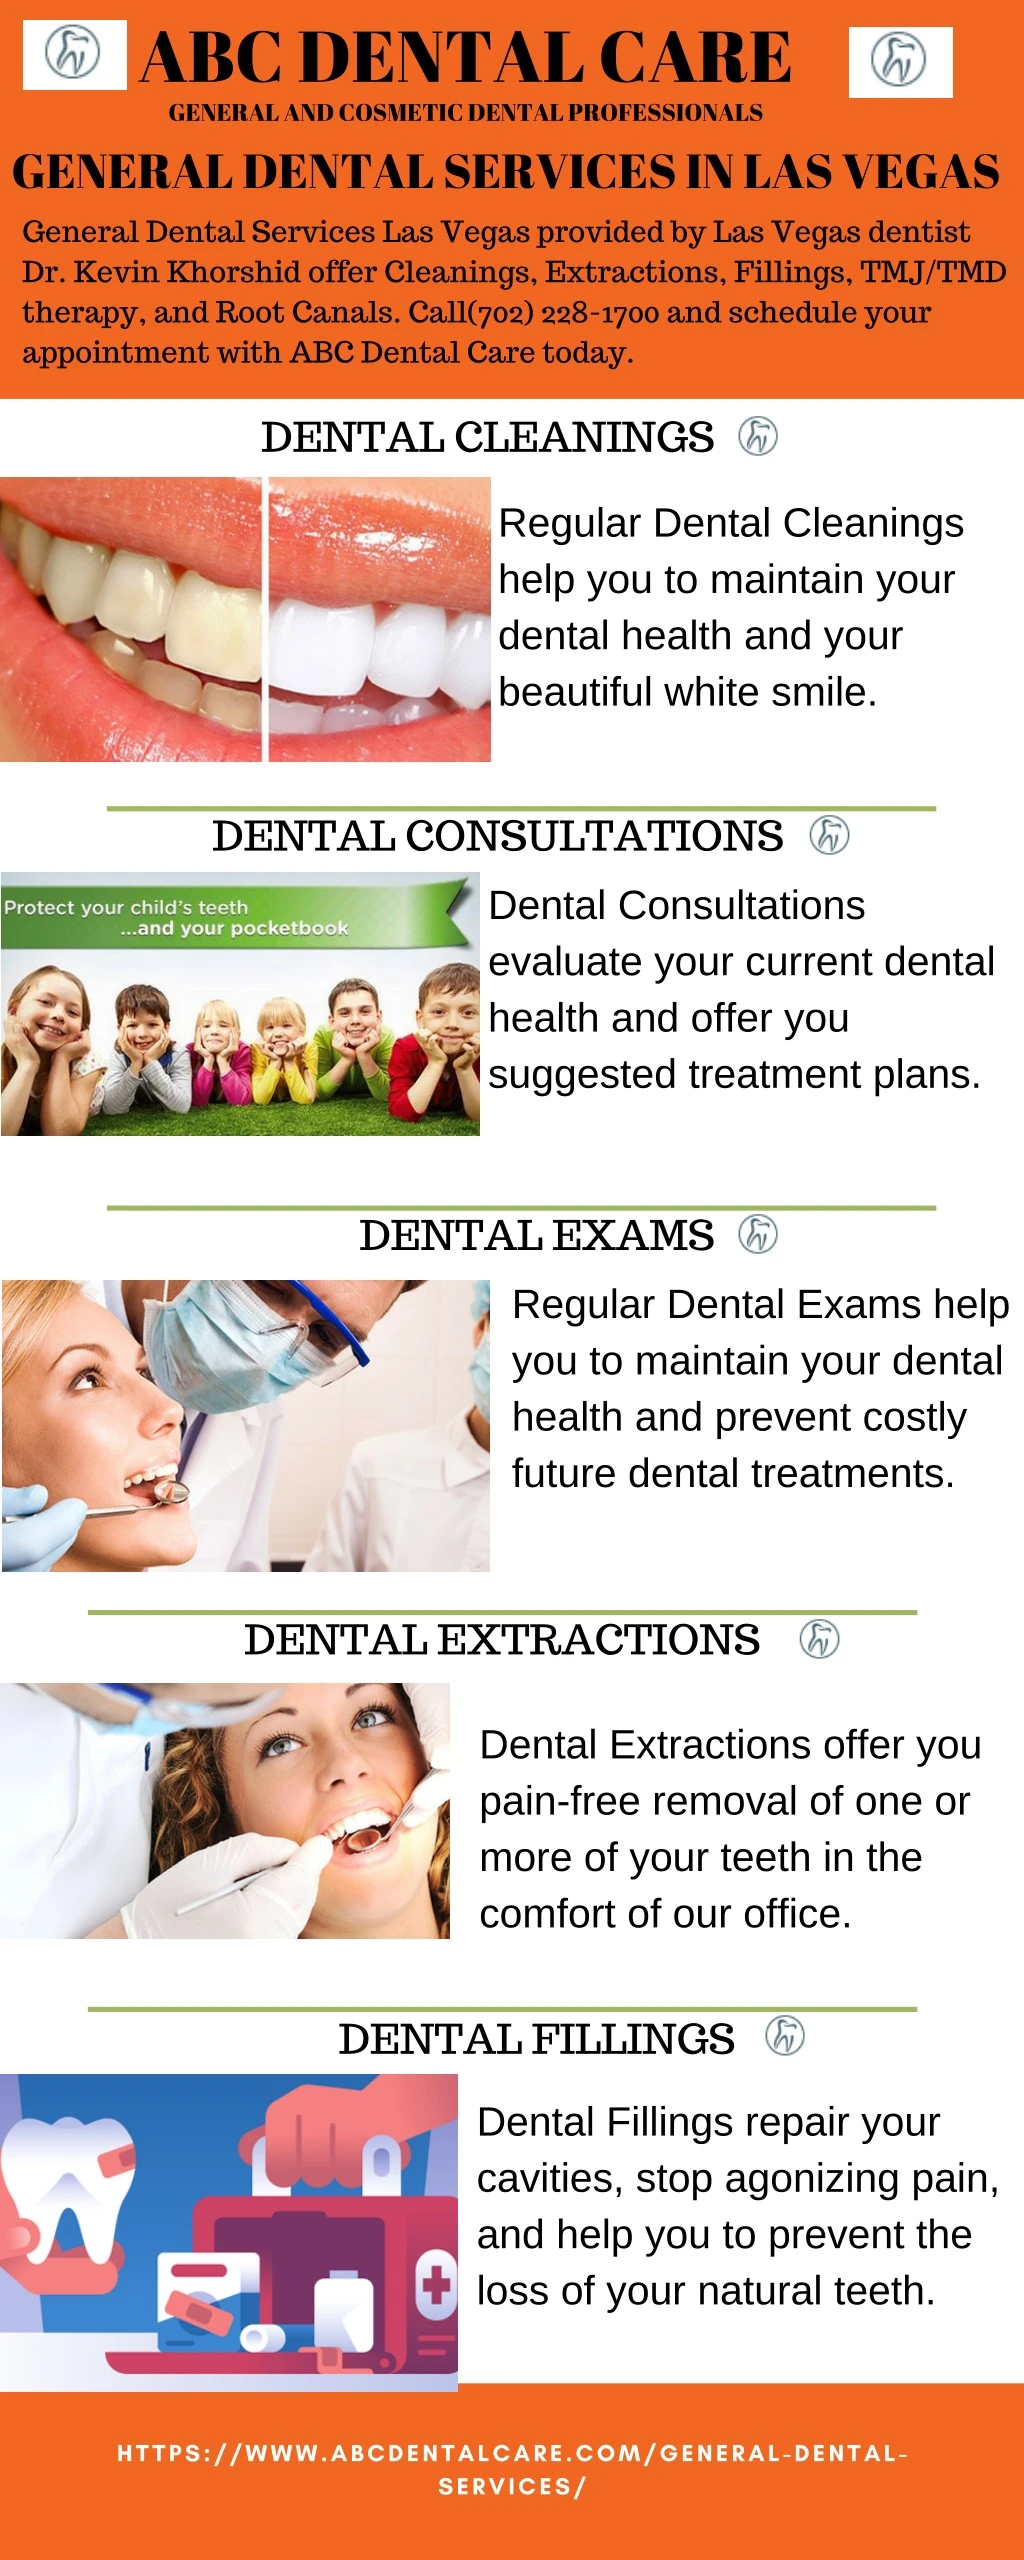 abc dental care general and cosmetic dental